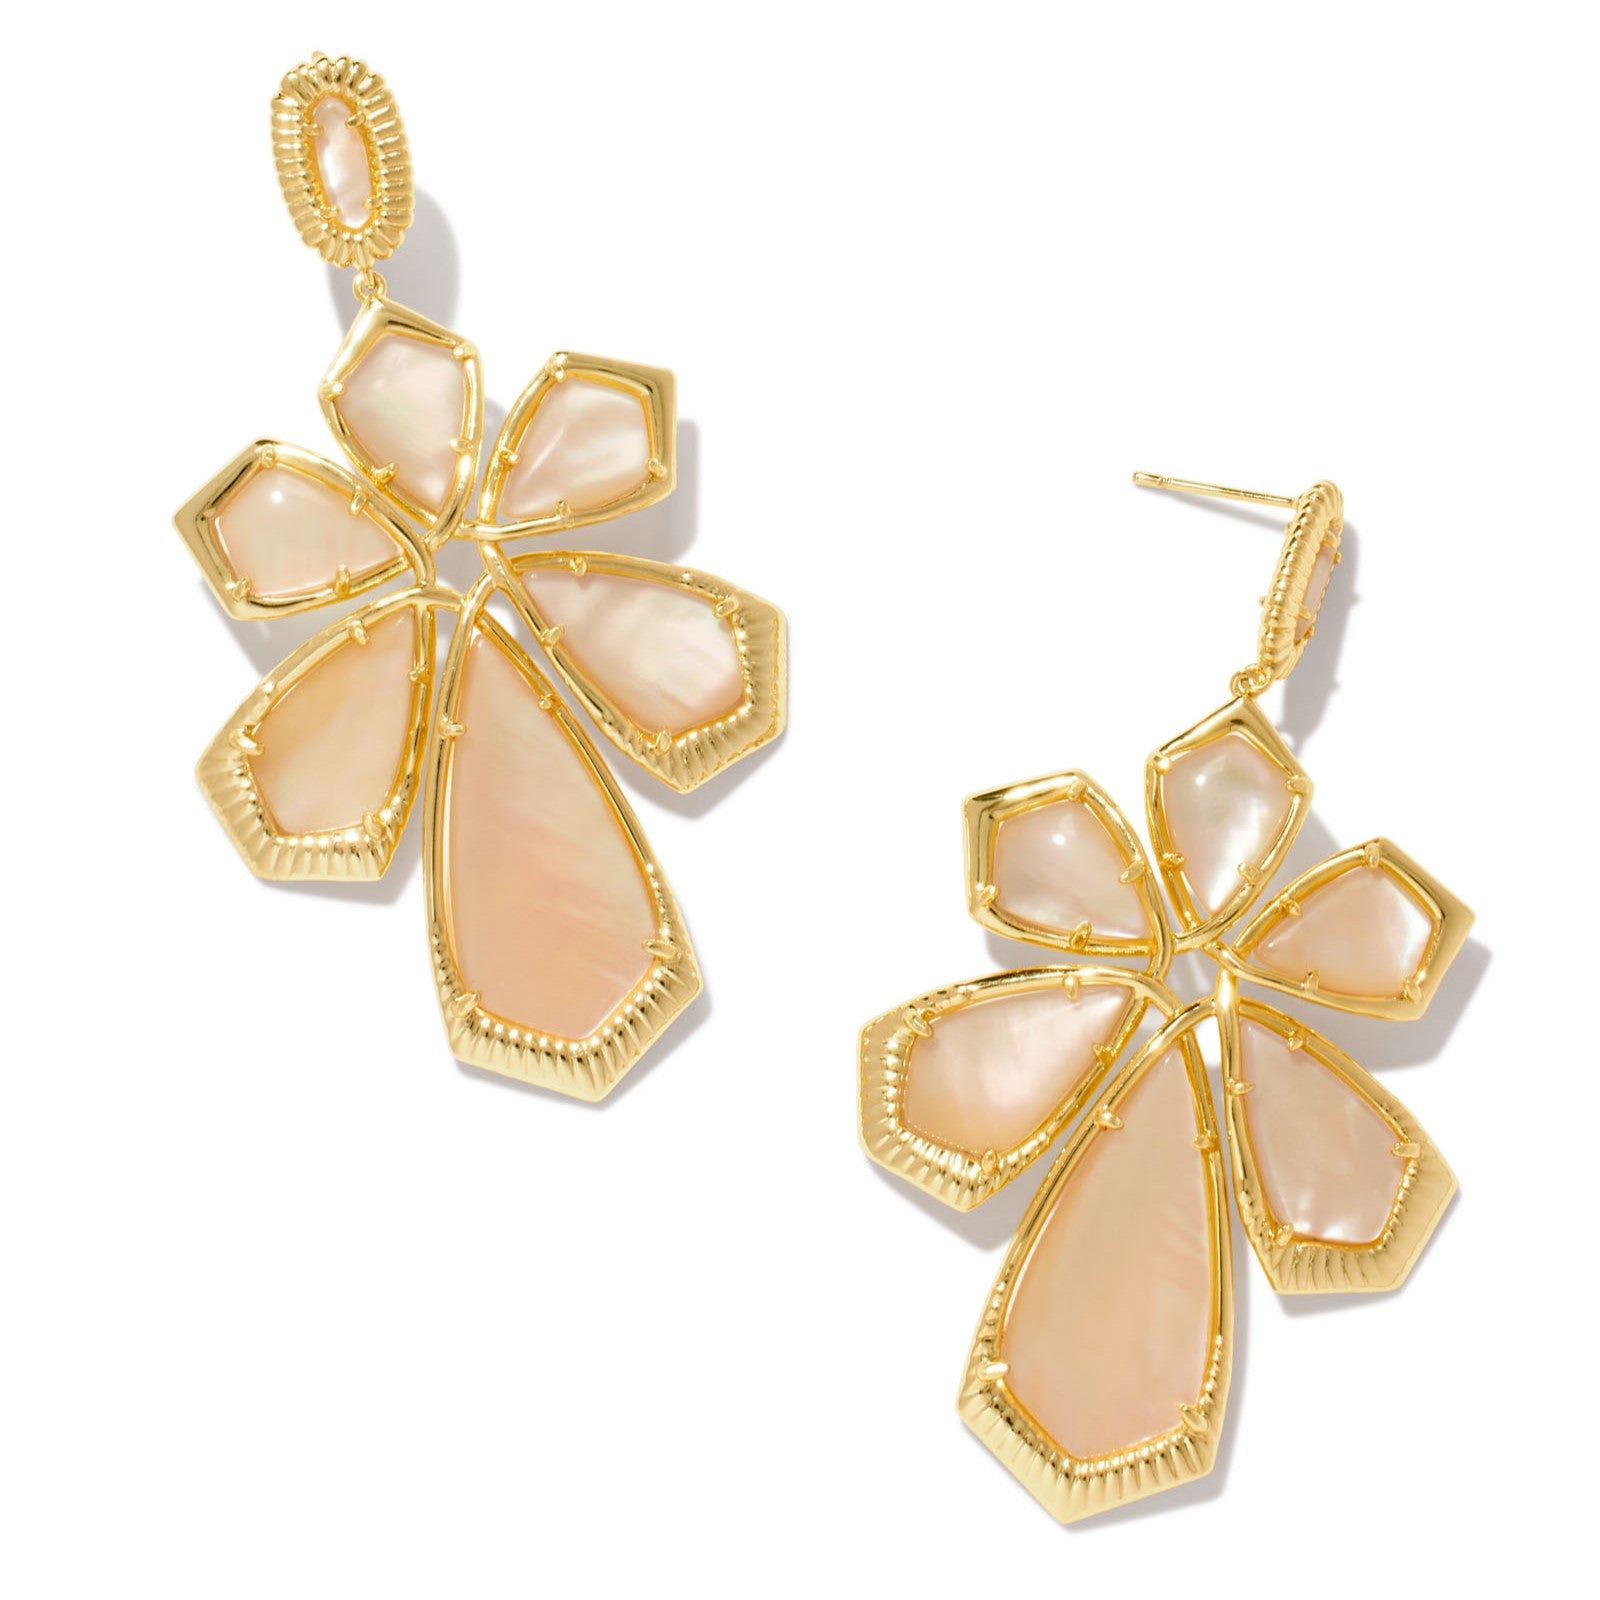 Kendra Scott | Layne Gold Statement Earrings in Golden Abalone - Giddy Up Glamour Boutique